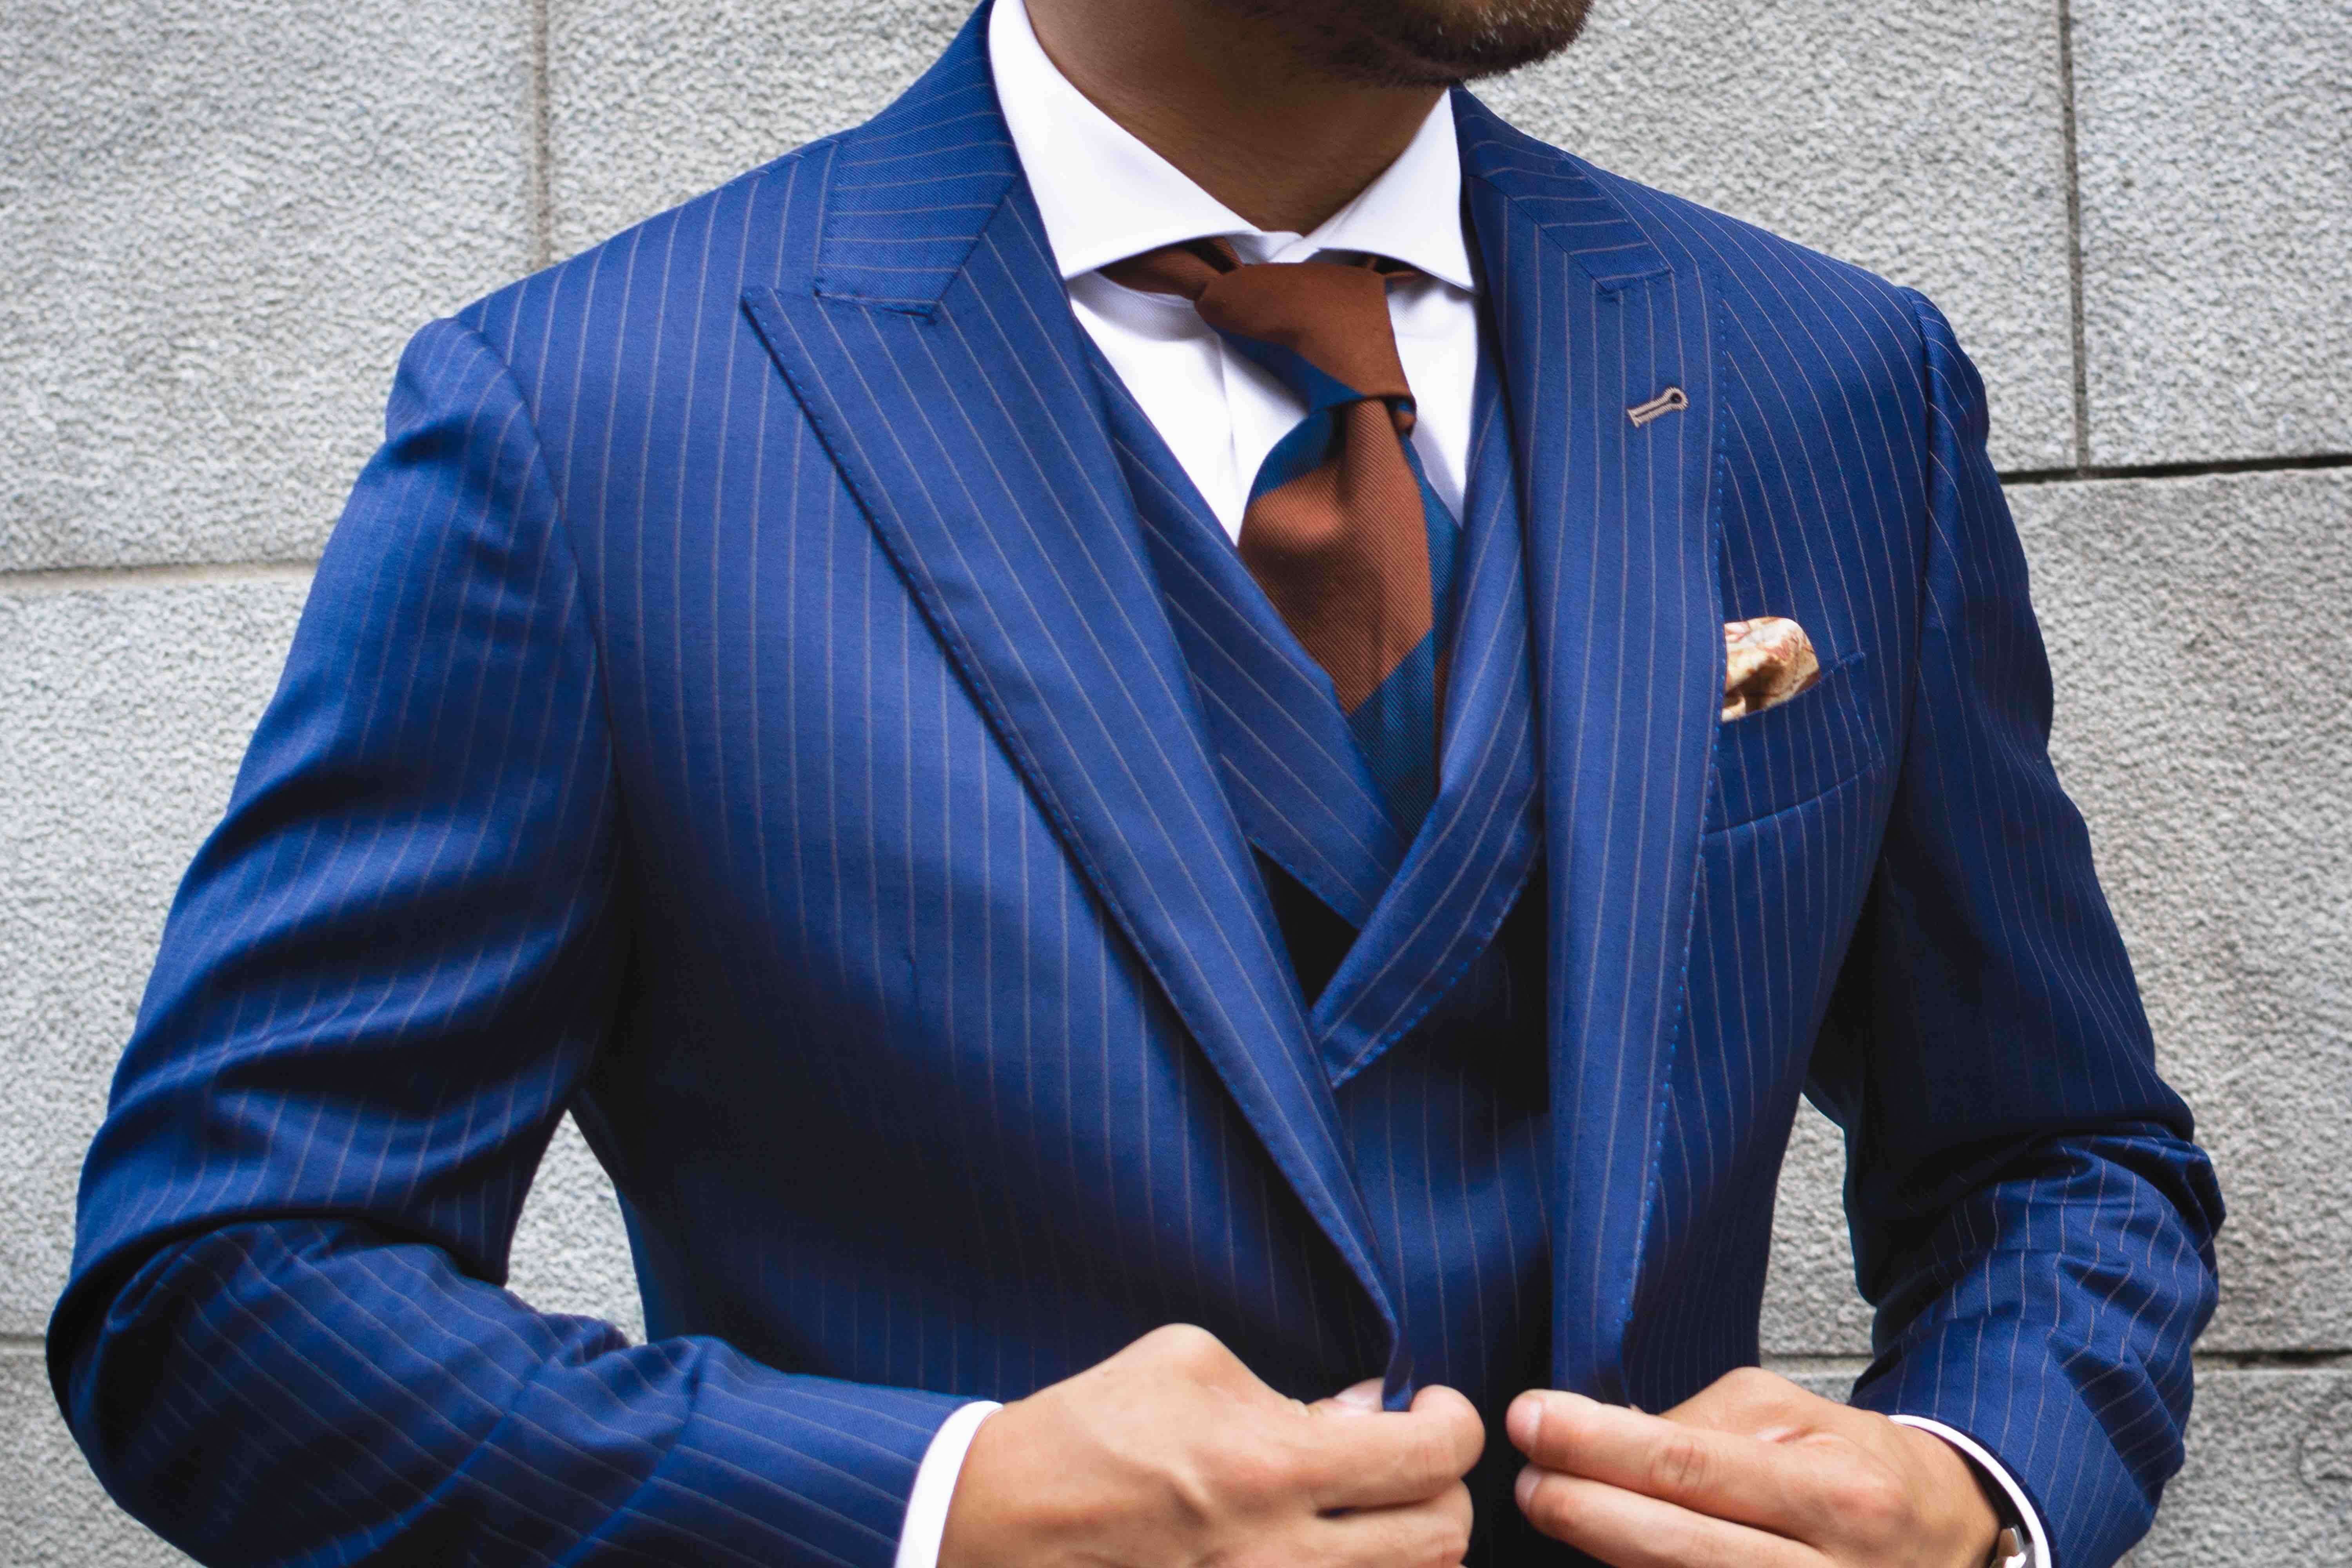 Wool or Polyester? What You Need to Know About Wool Suits versus Polyester Suits